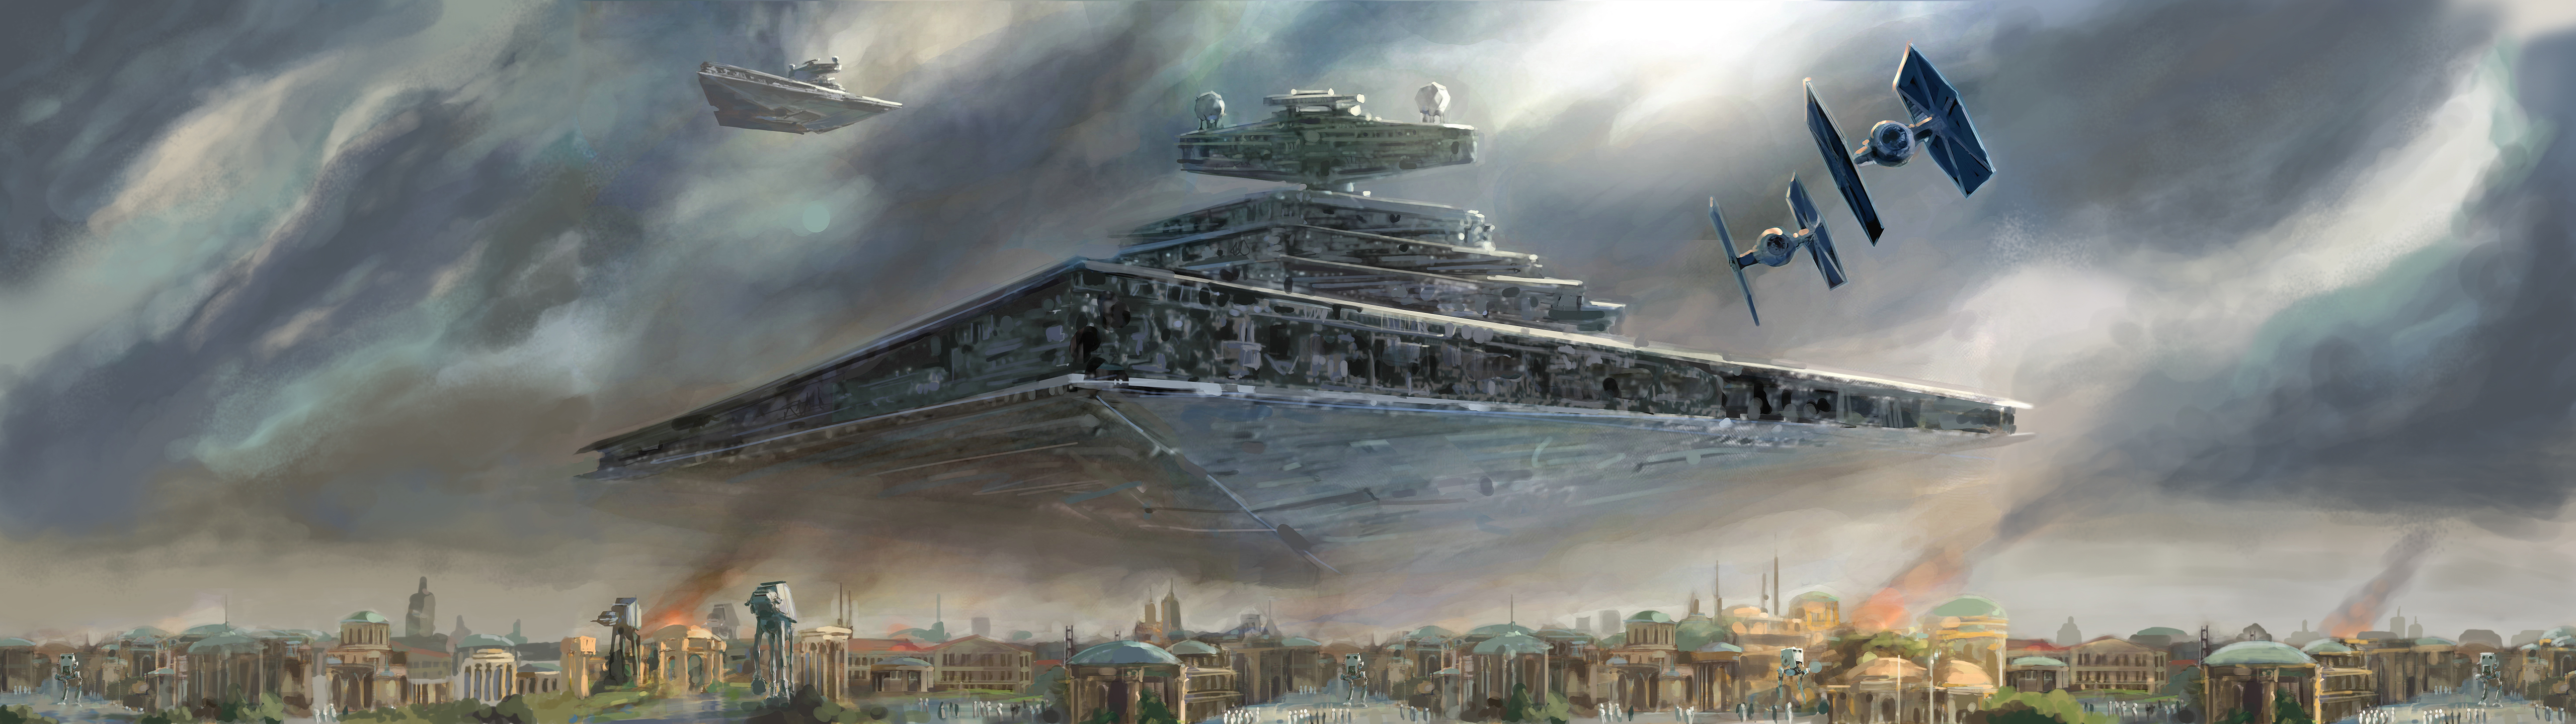 Star Destroyer, Naboo, TIE Fighter, AT AT Walker, Star Wars, Painting Wallpaper